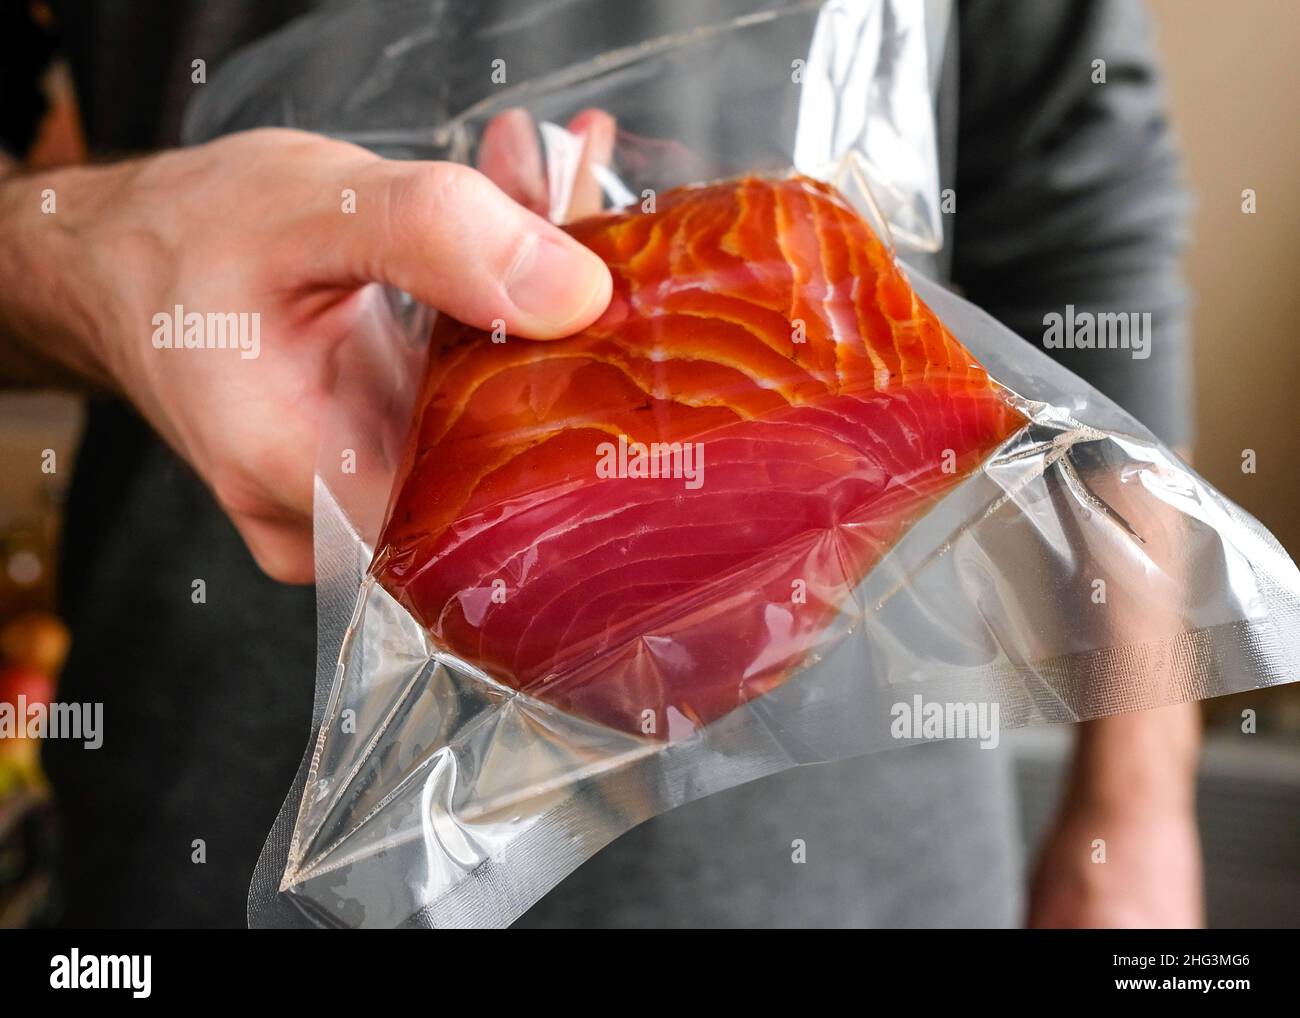 A man holding a red fish in a package. Stock Photo